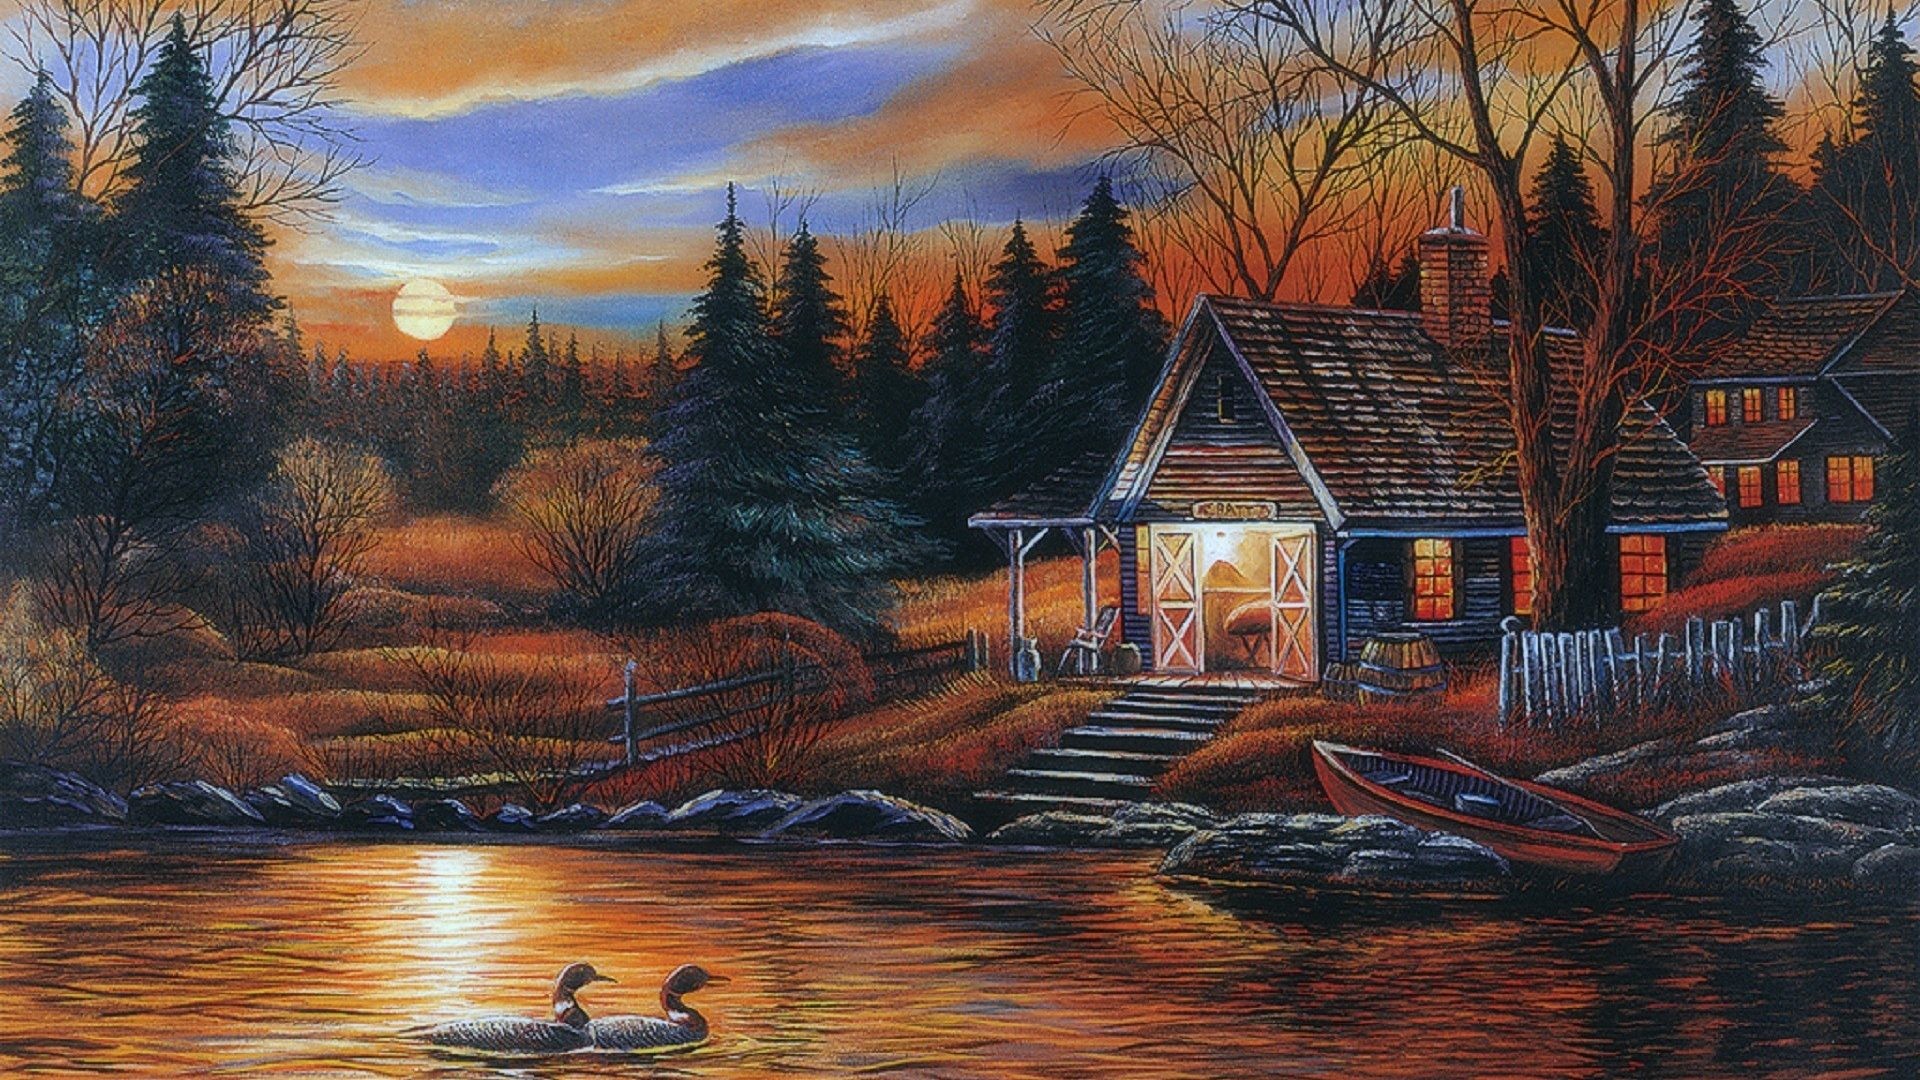 1920x1080 Paintings Tag - Romantic Lakeside Paintings Sunsets Animals Couple Love Four  Seasons Cottages Lakes Attractions Dreams